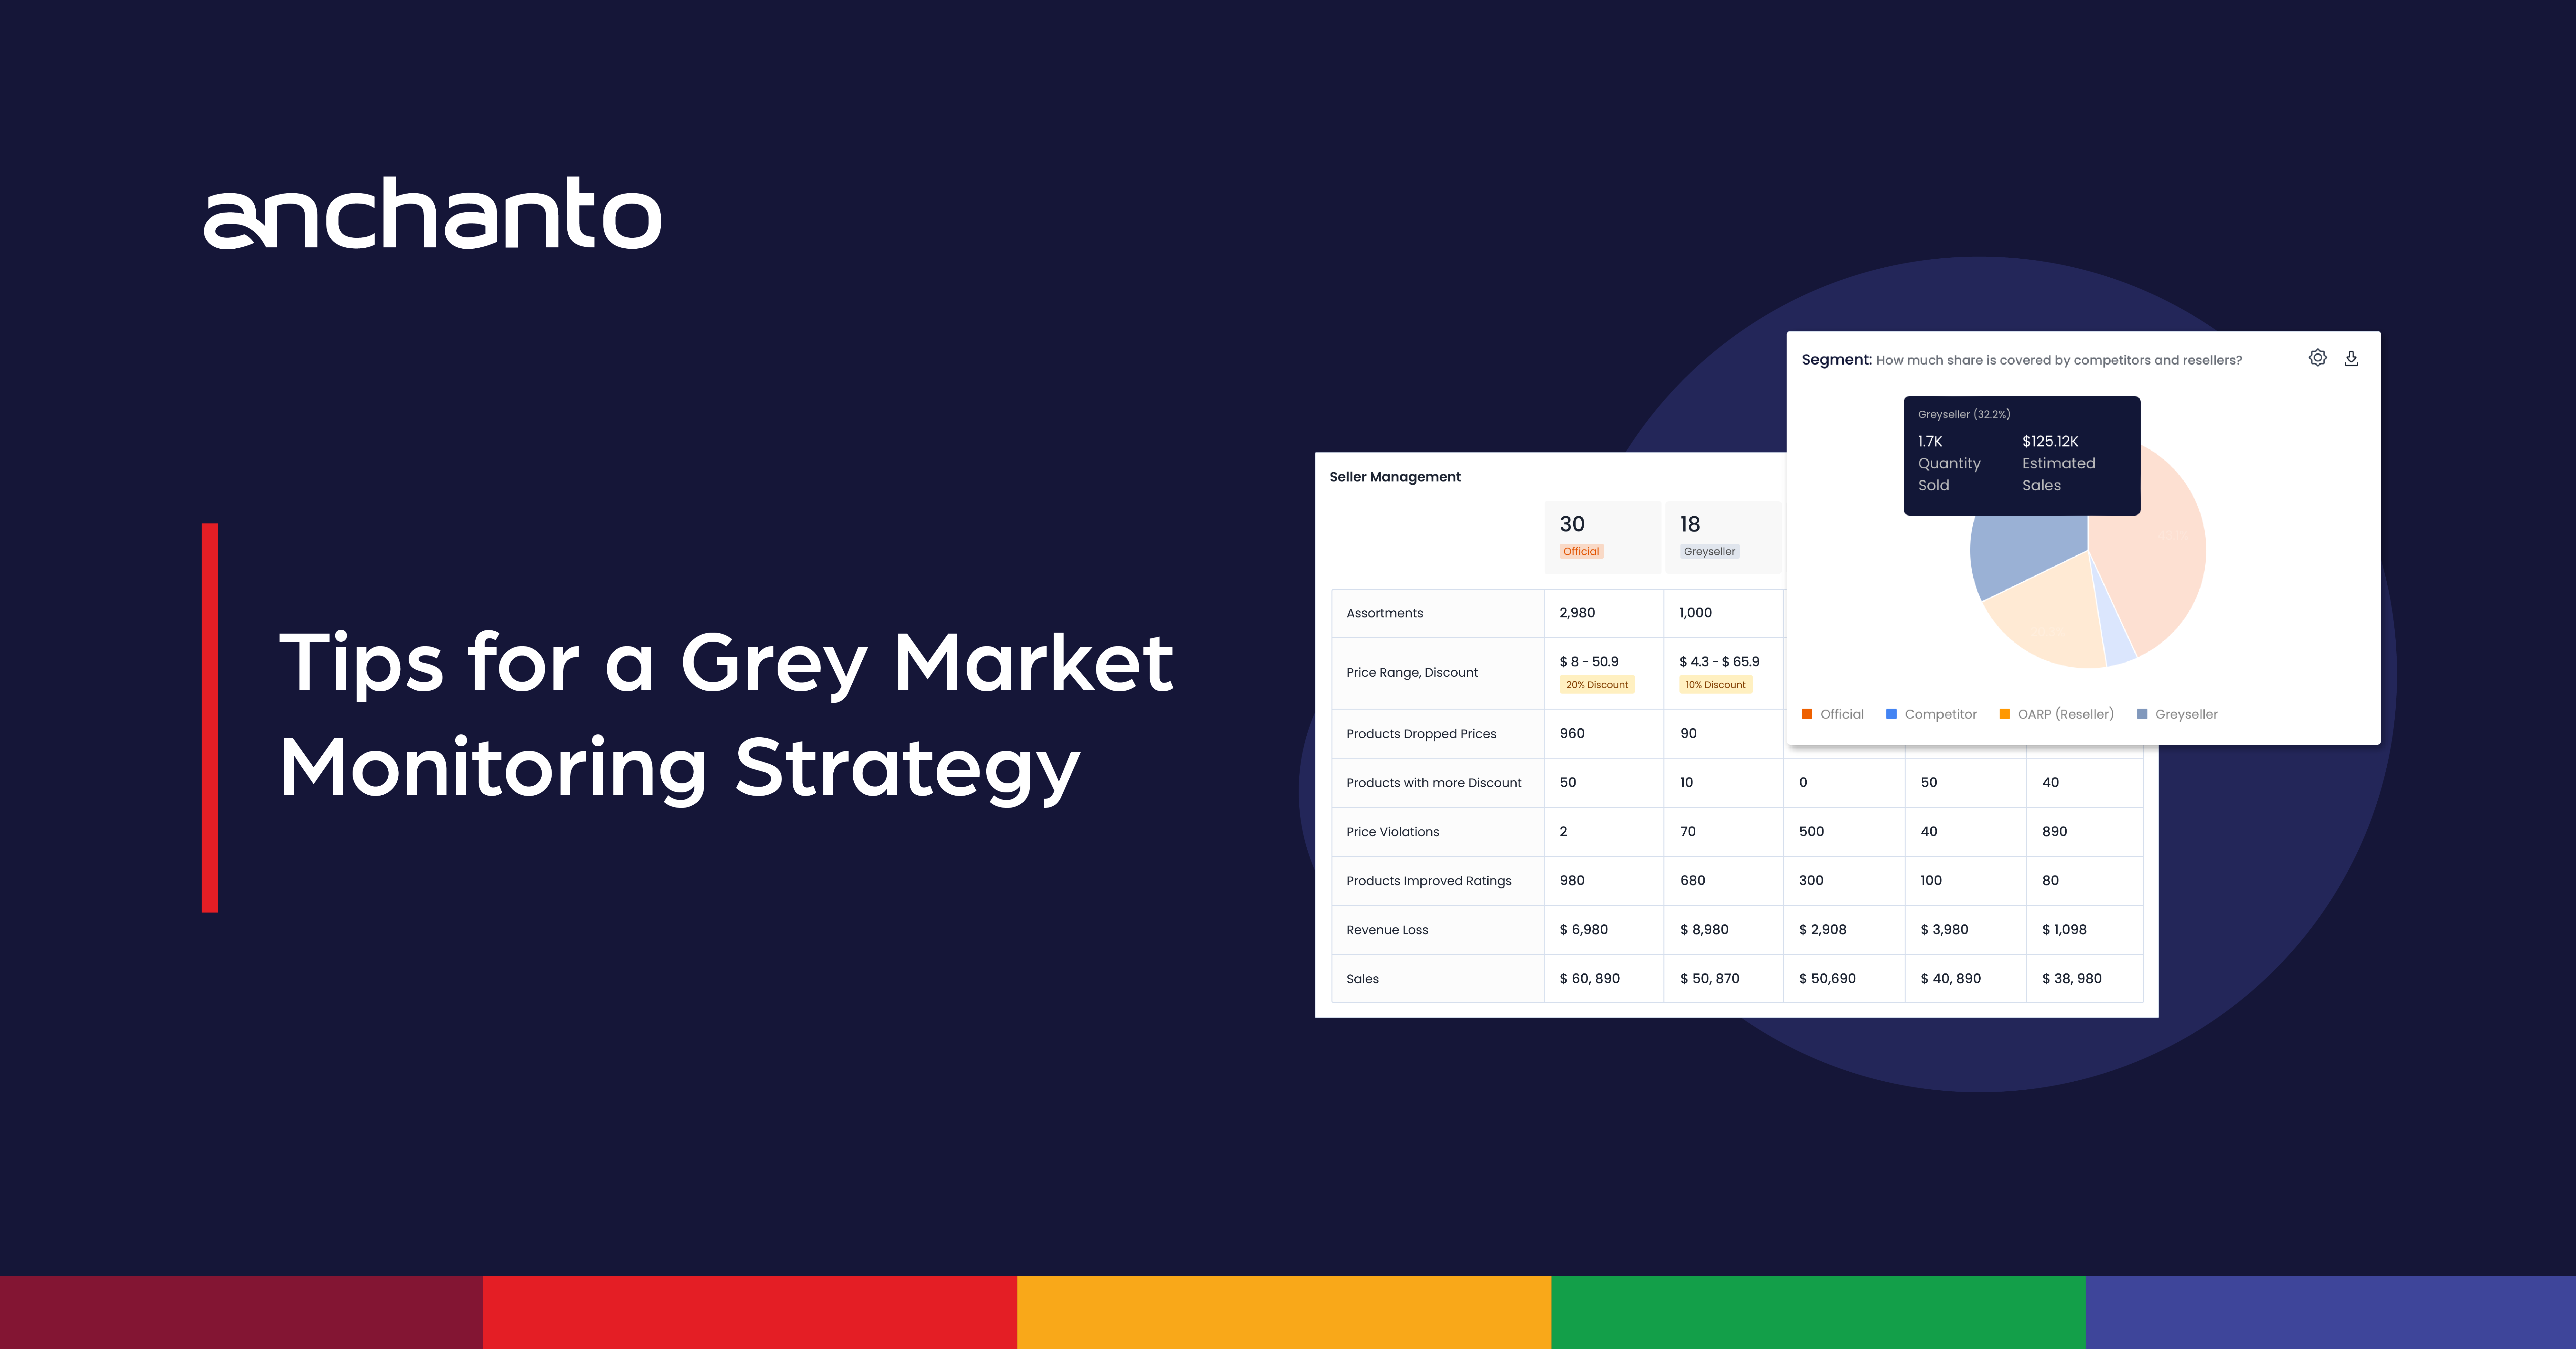 How to Build Your Strategy for Grey Market Monitoring